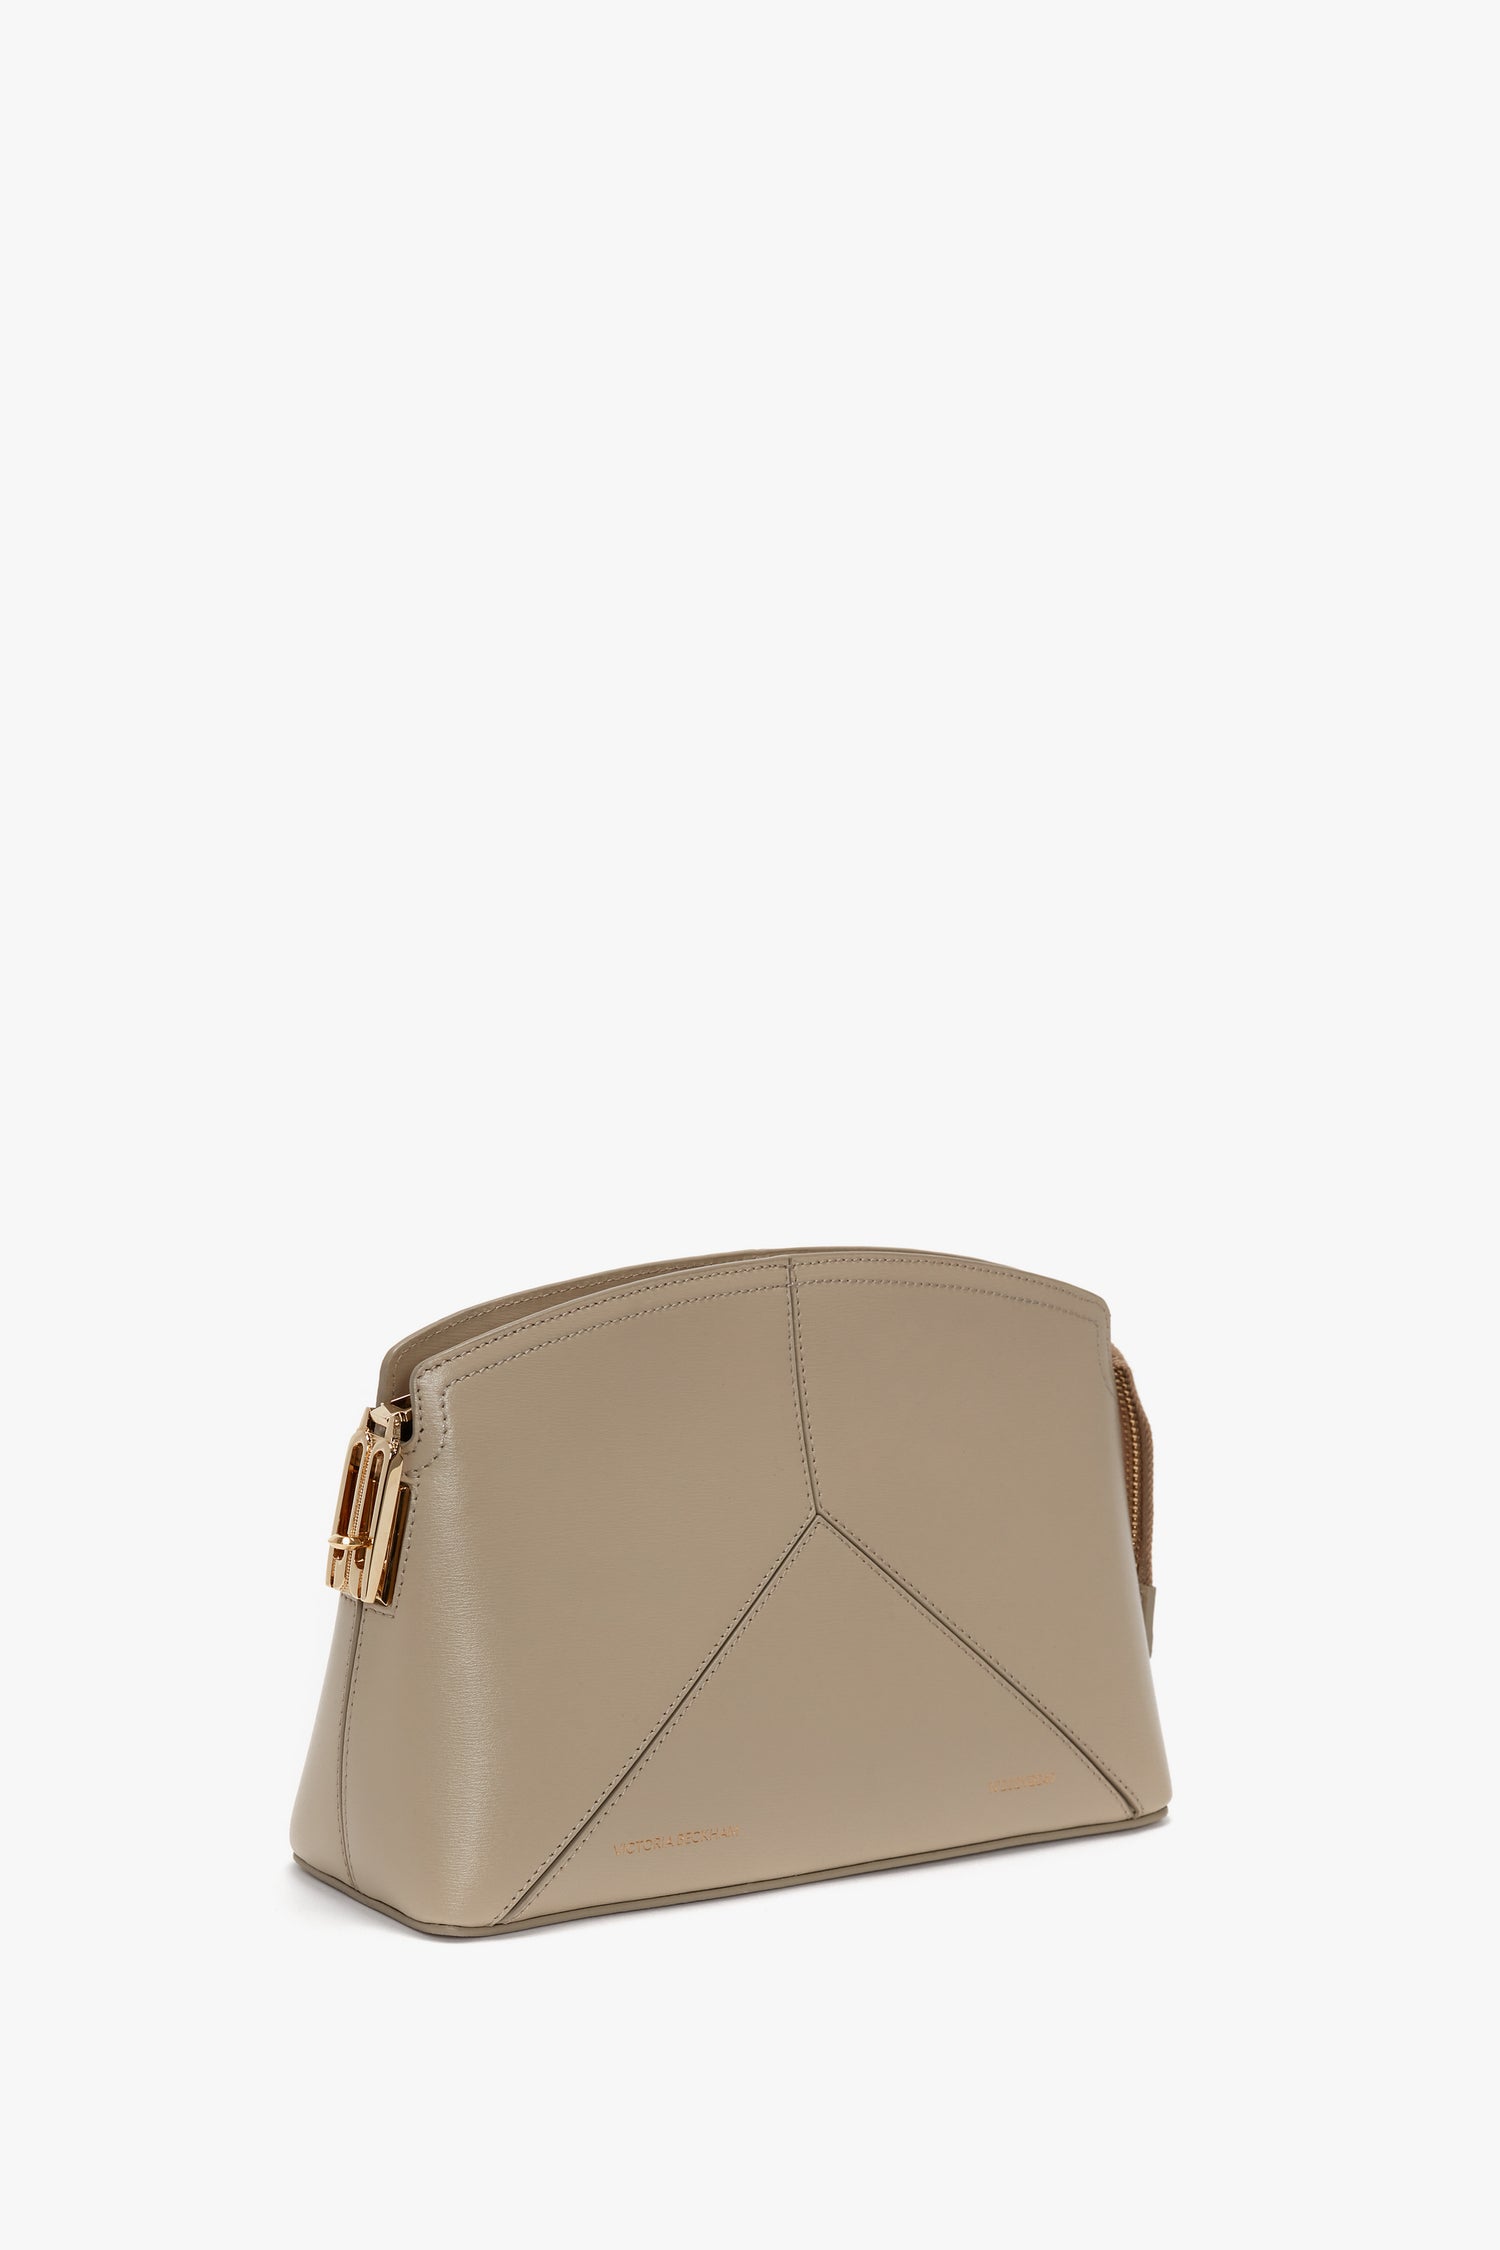 A Victoria Crossbody Bag In Taupe Leather with a structured design and gold-tone hardware, reminiscent of Victoria Beckham's elegant touch.